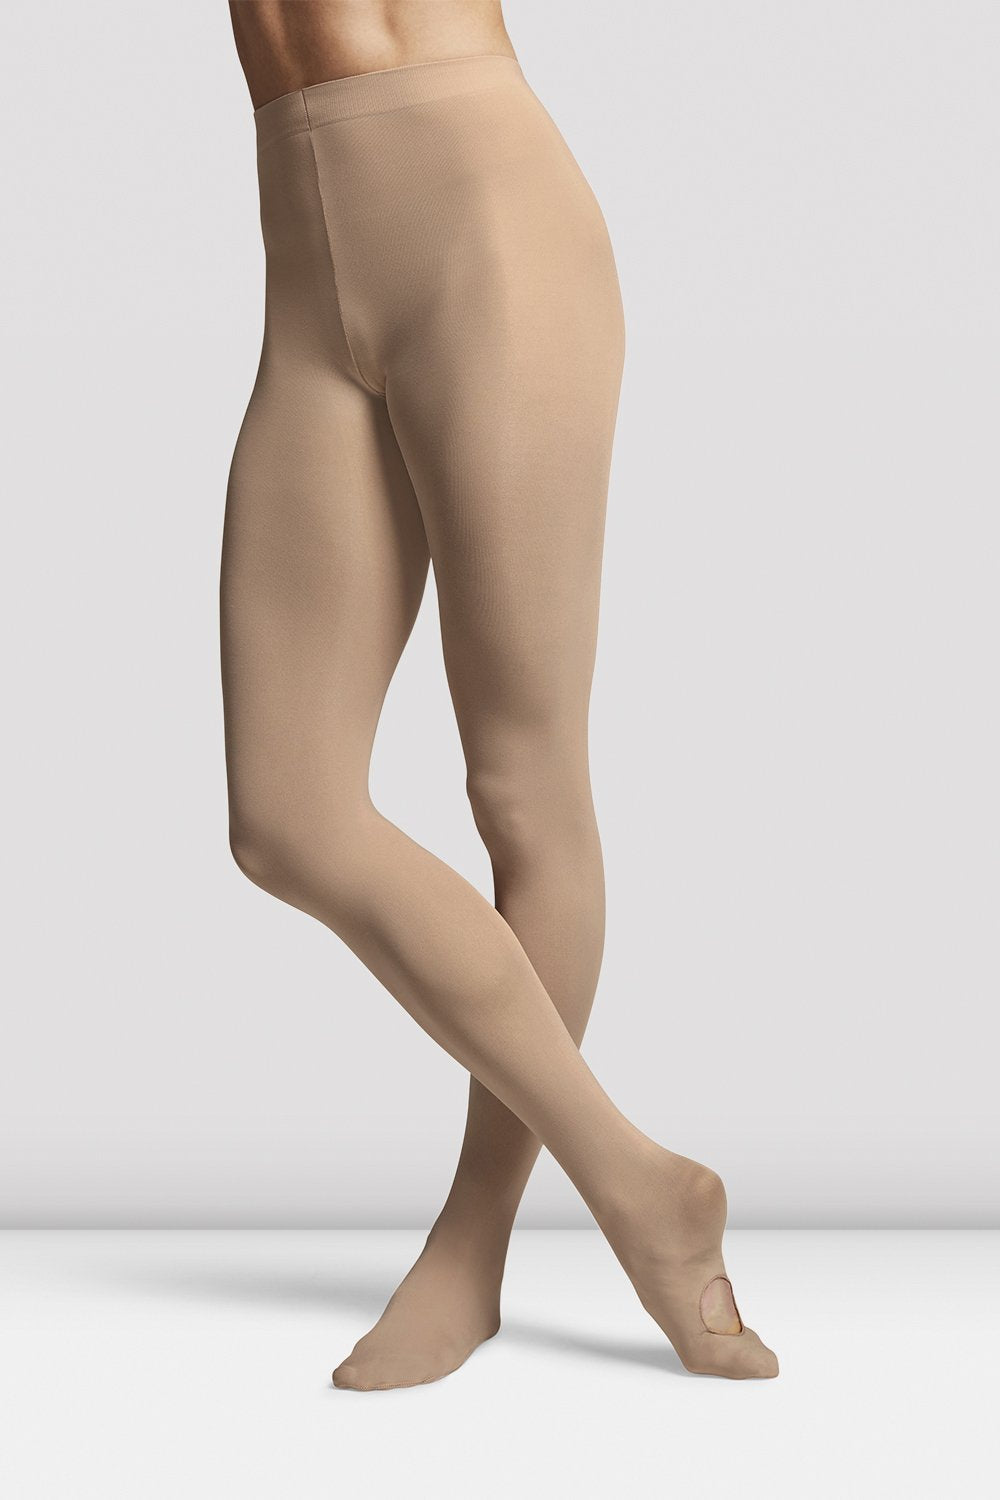 Adult Contoursoft Adaptatoe Tights (Variety of Colors)